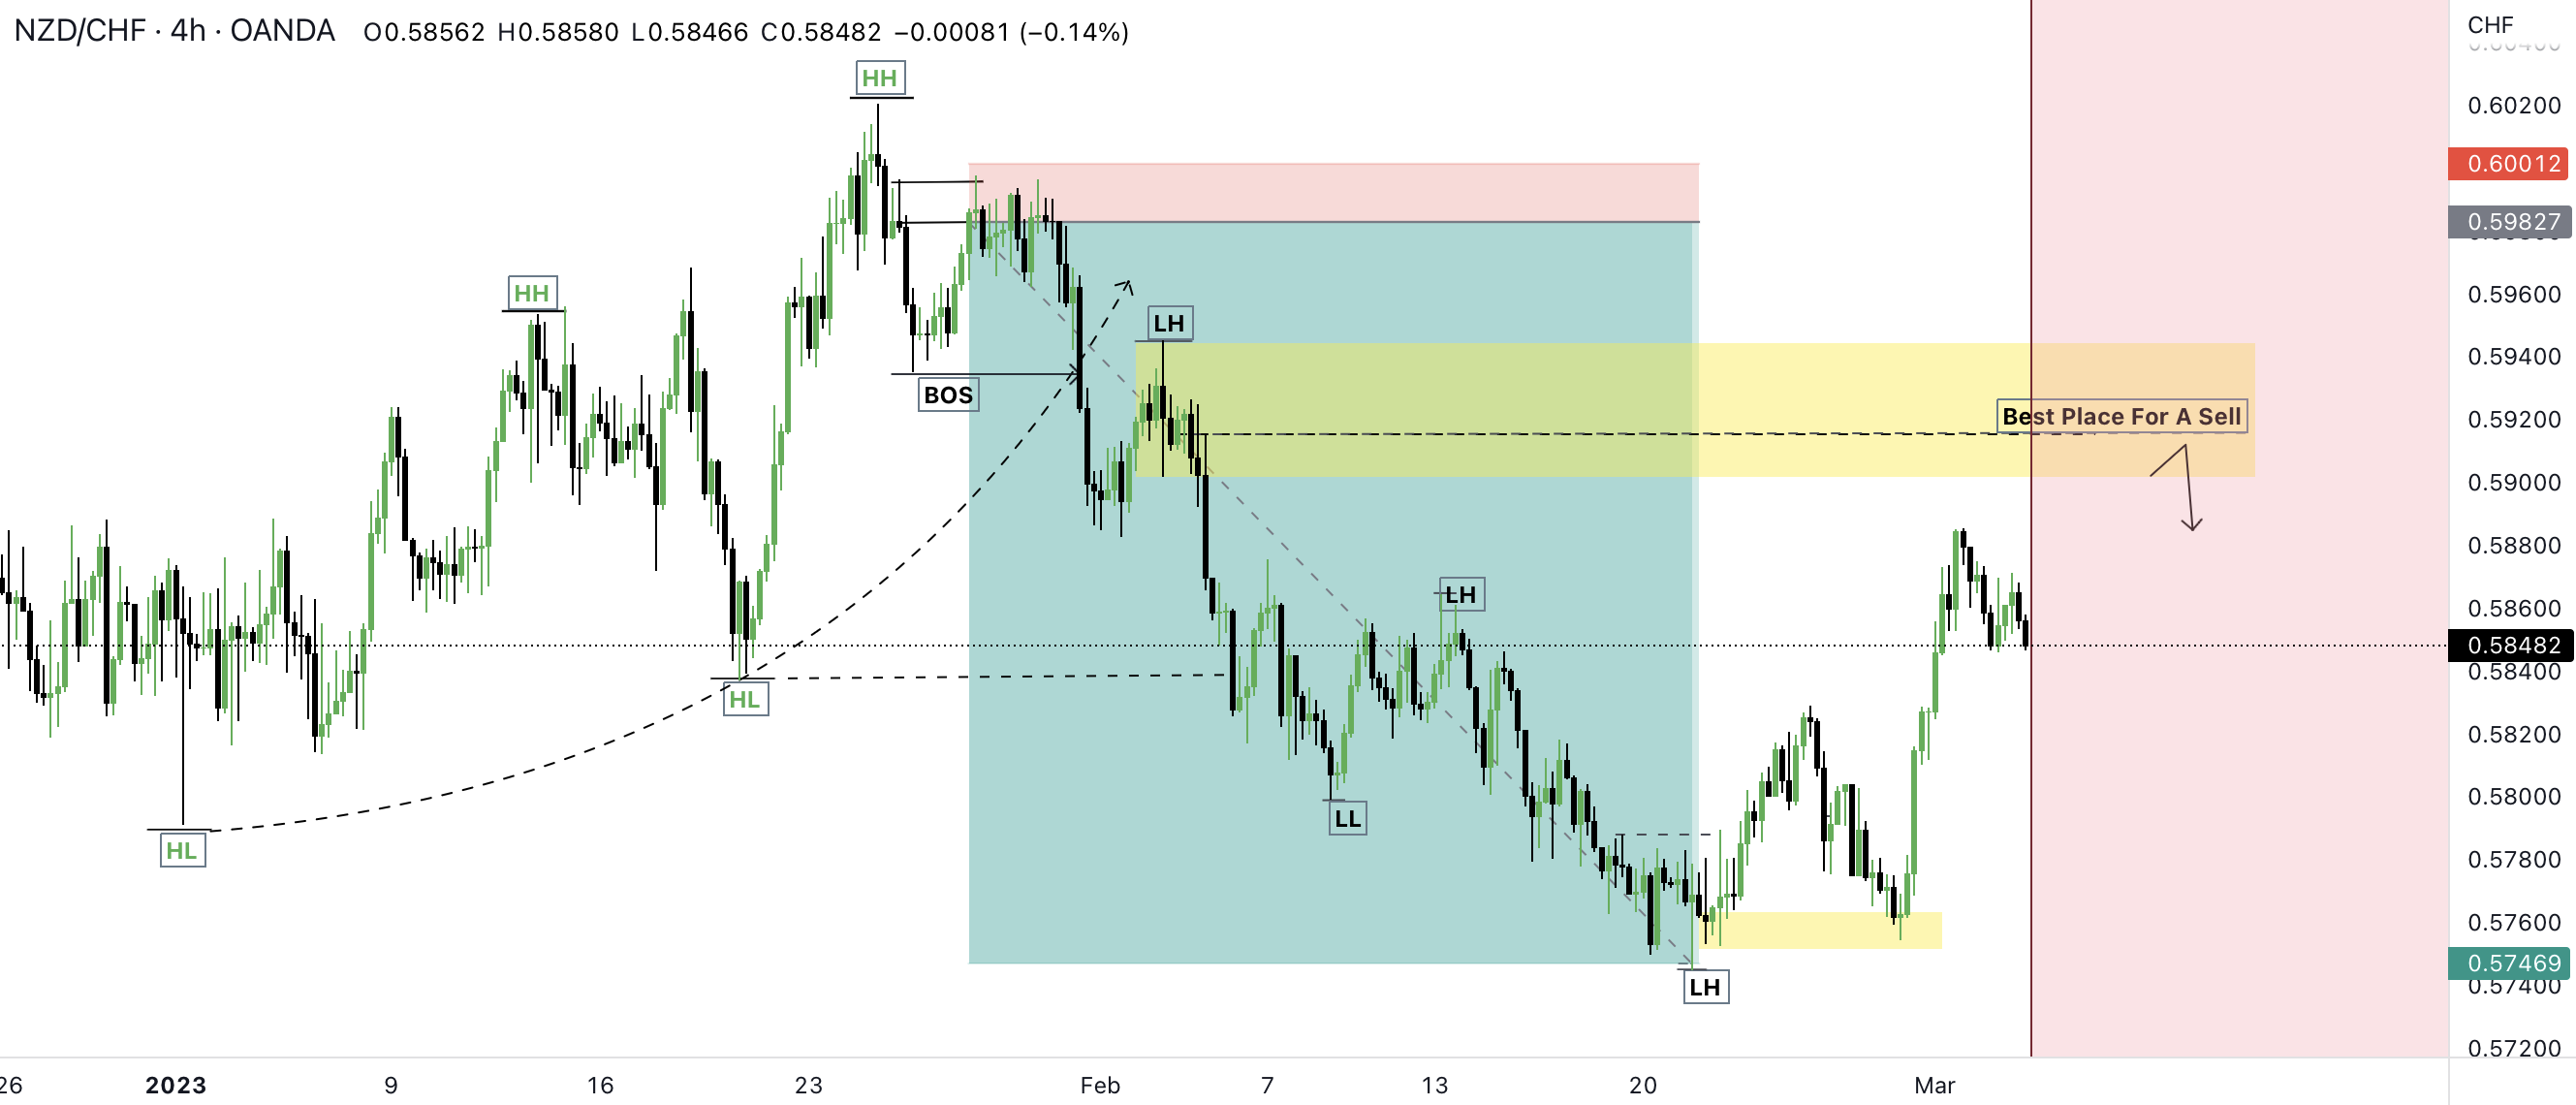 NZDCHF Next Opportunity For This Pair